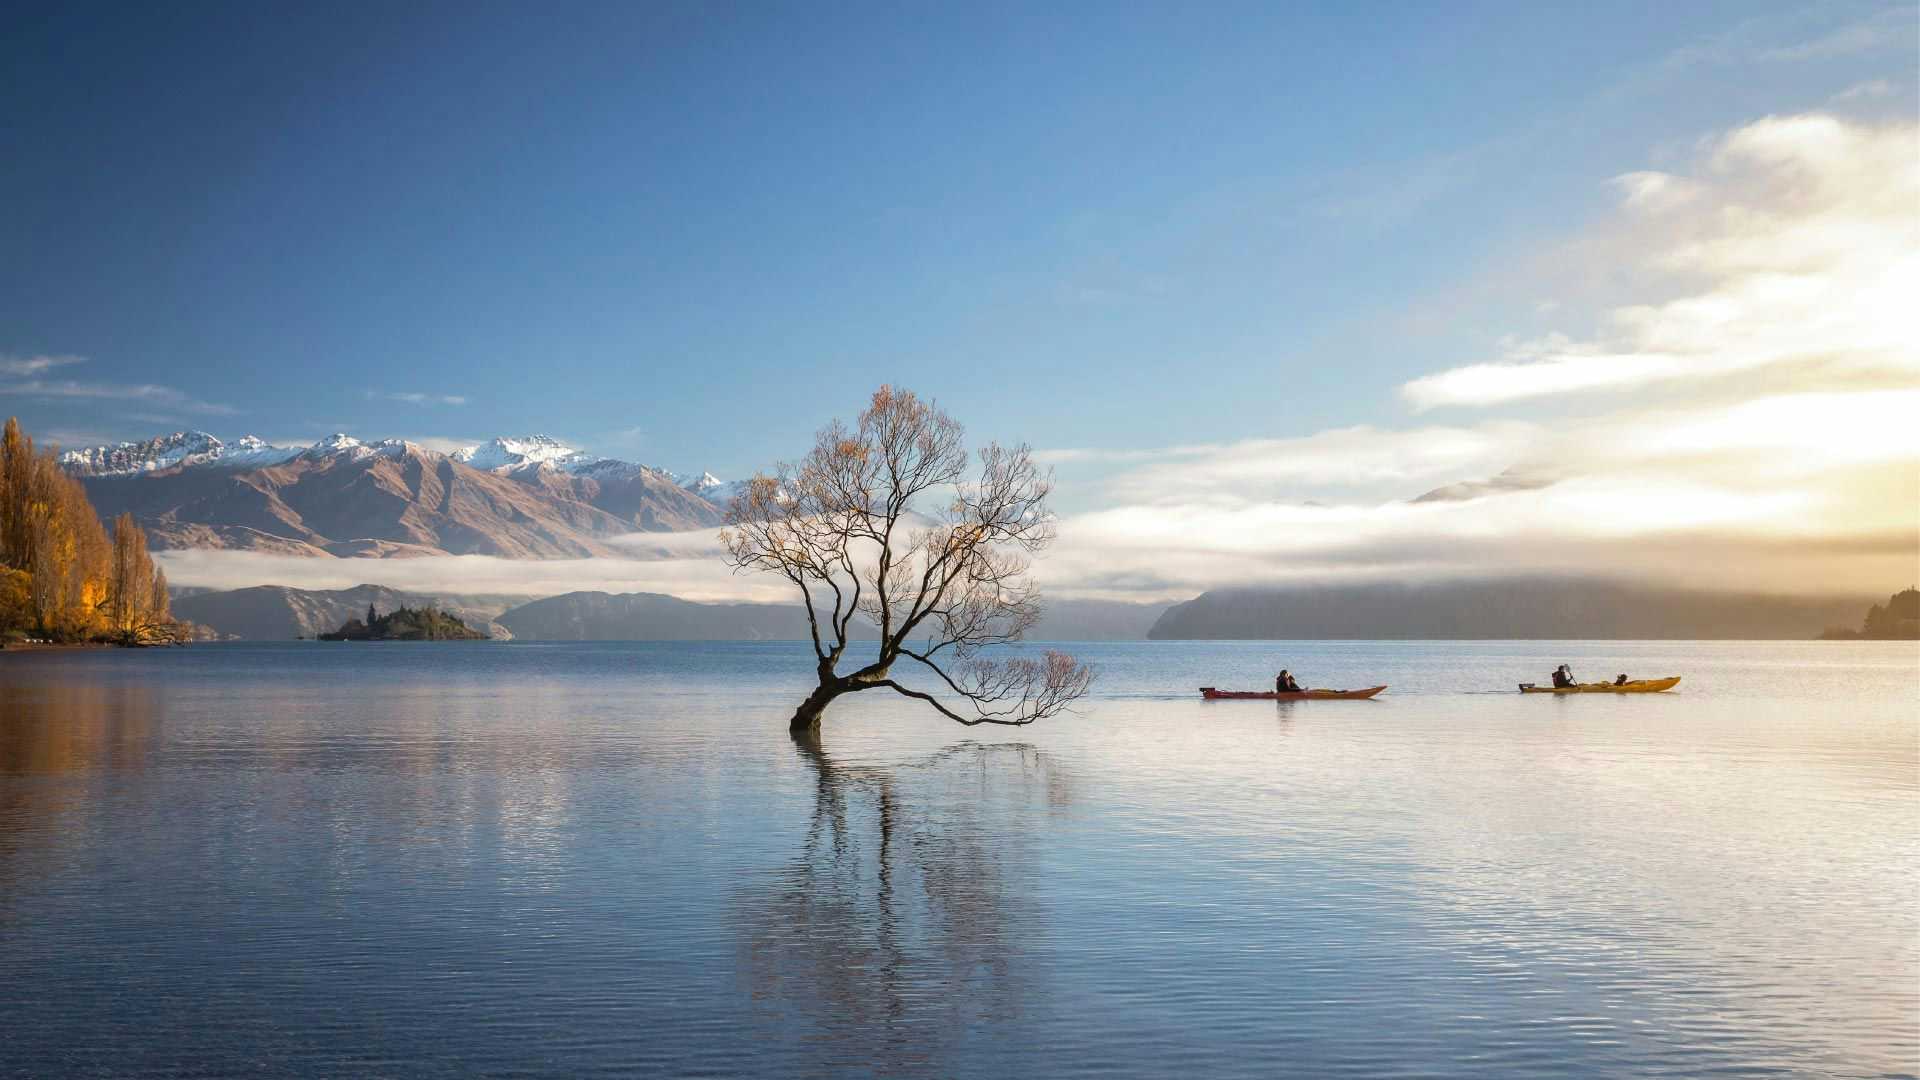 Two kayakers on Lake Wanaka in New Zealand